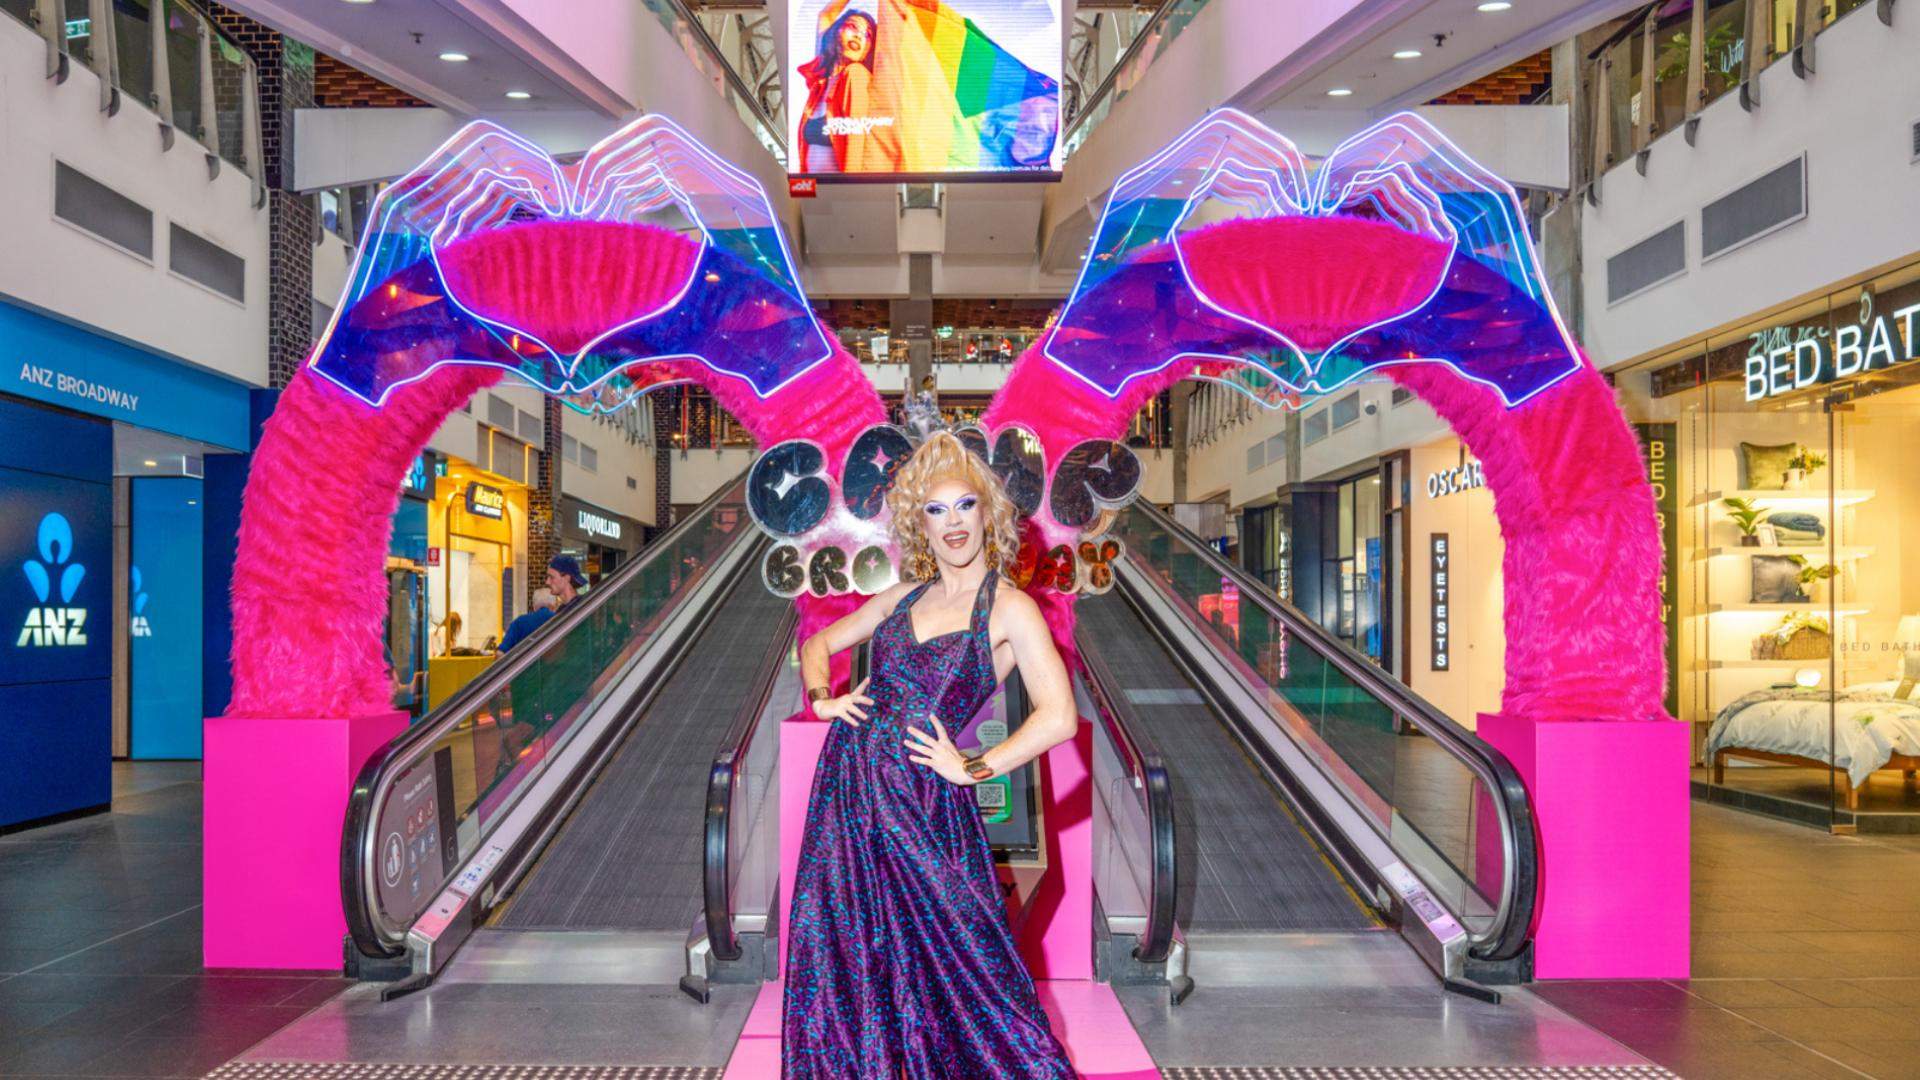 Shop and Slay: Broadway is Celebrating Sydney Mardi Gras with Drag Bingo and More